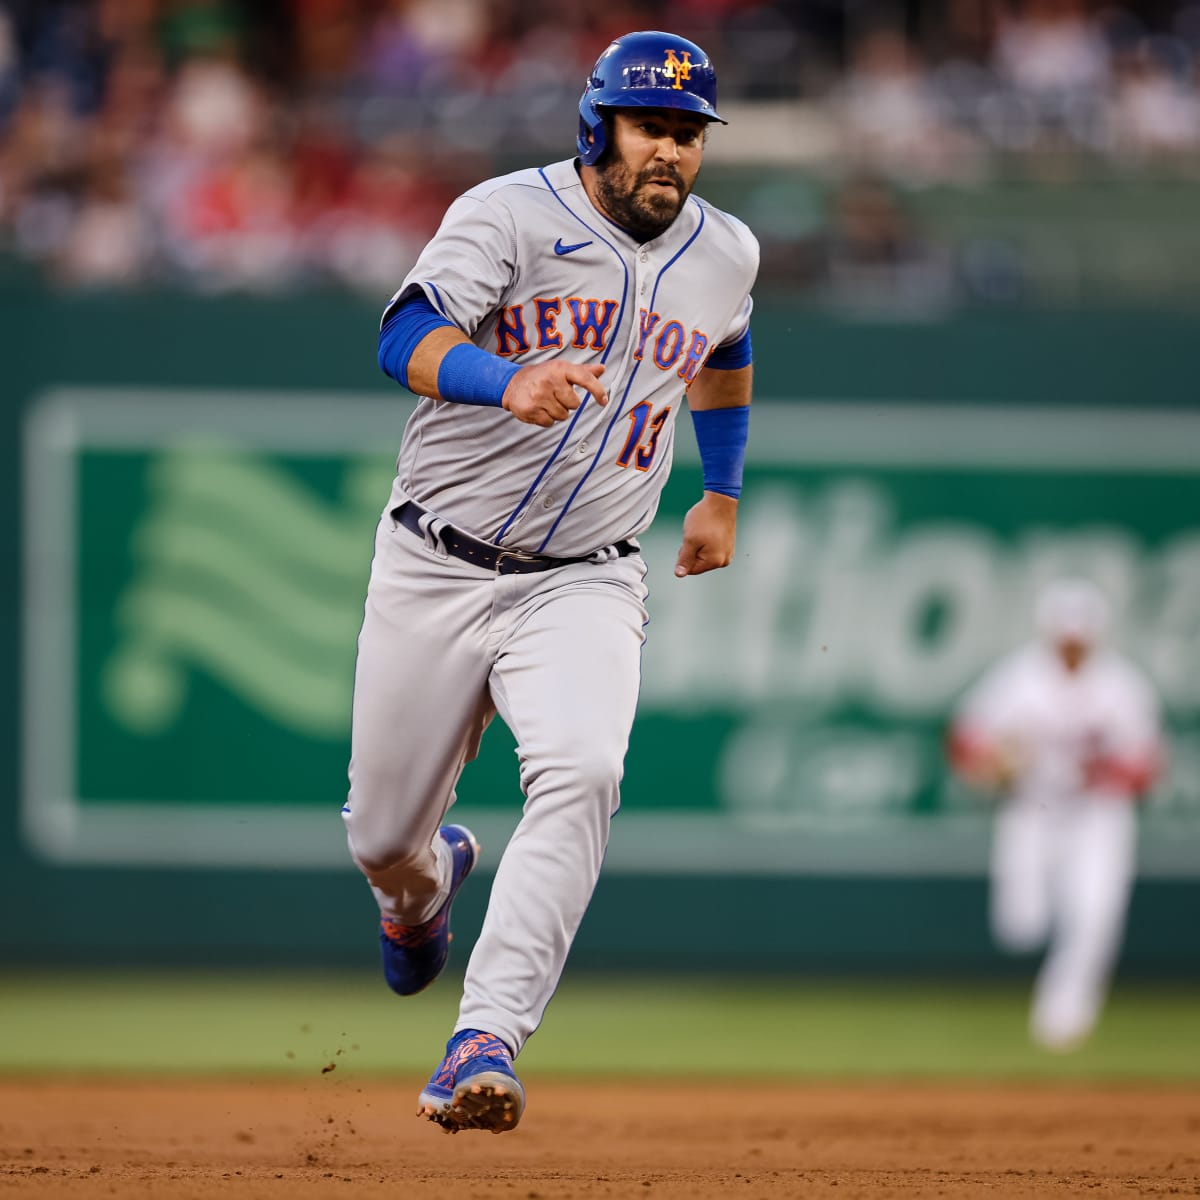 Mets place infielder Luis Guillorme on 10-day IL with groin strain